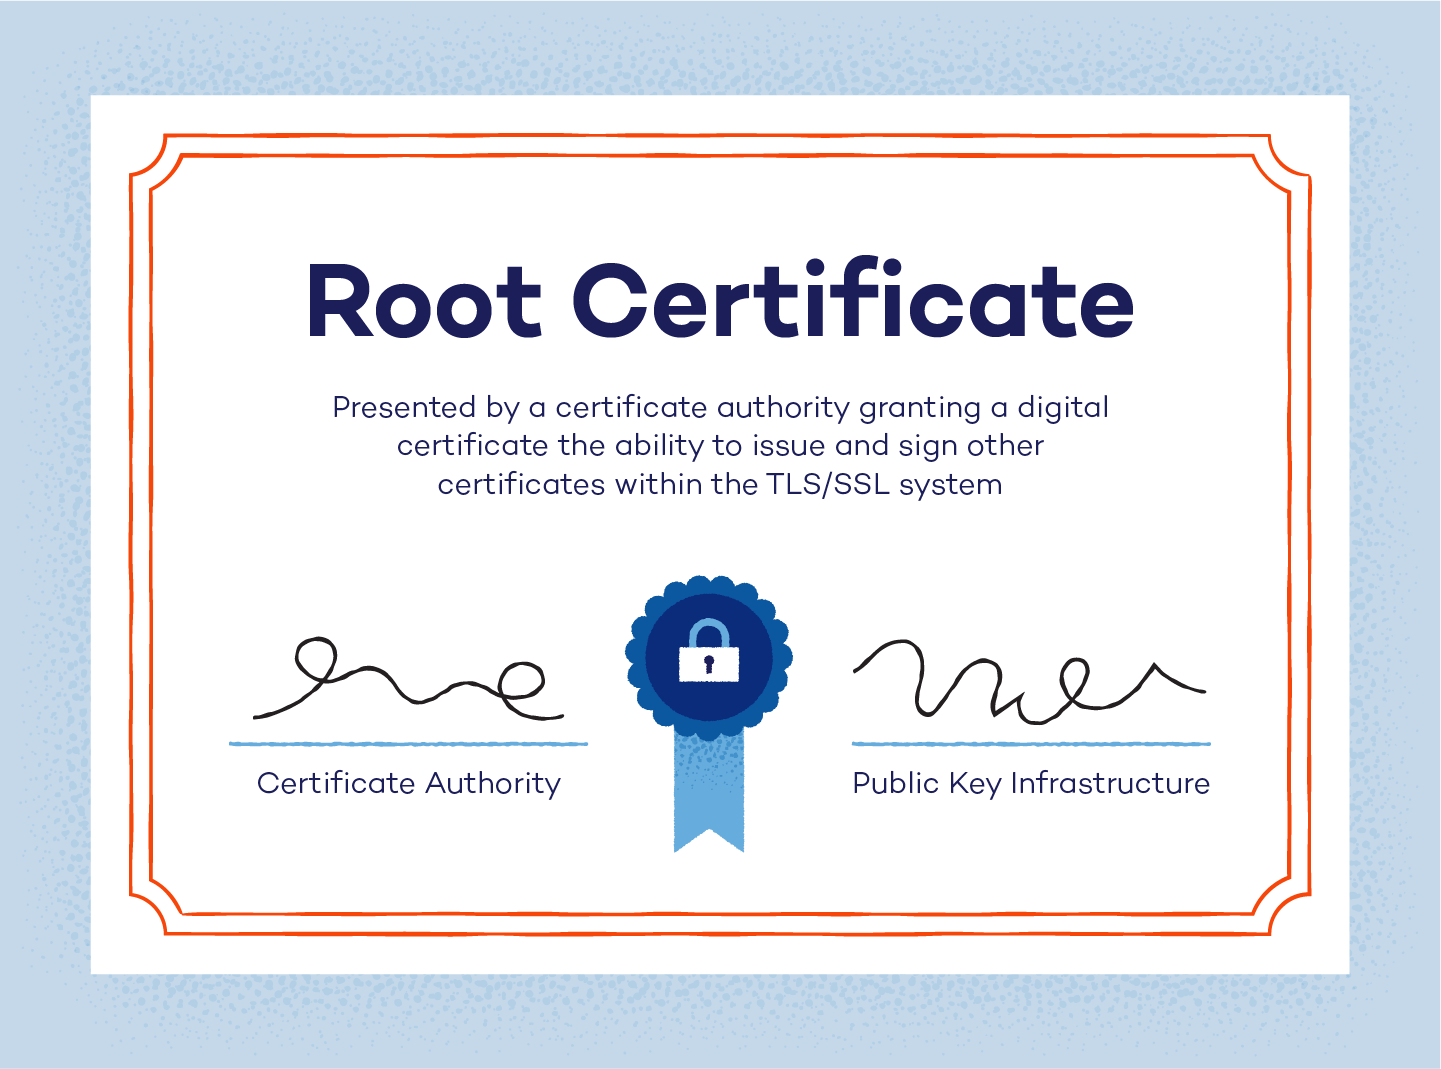 Root certificate image illustrated how a root certificate works.